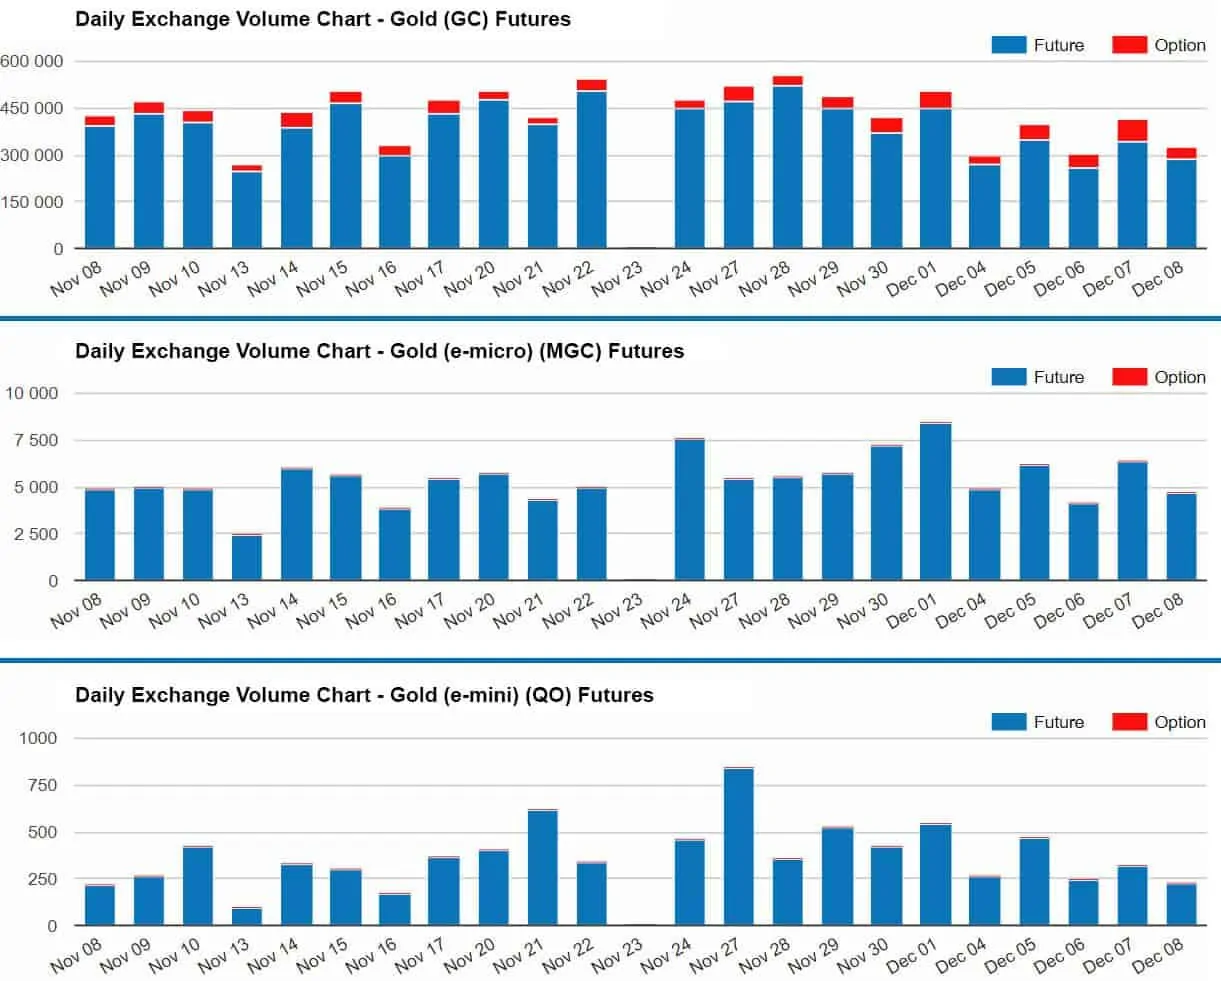 Comparison of the day trading volumes of GC, MGC and QO futures (Source: CME Group)